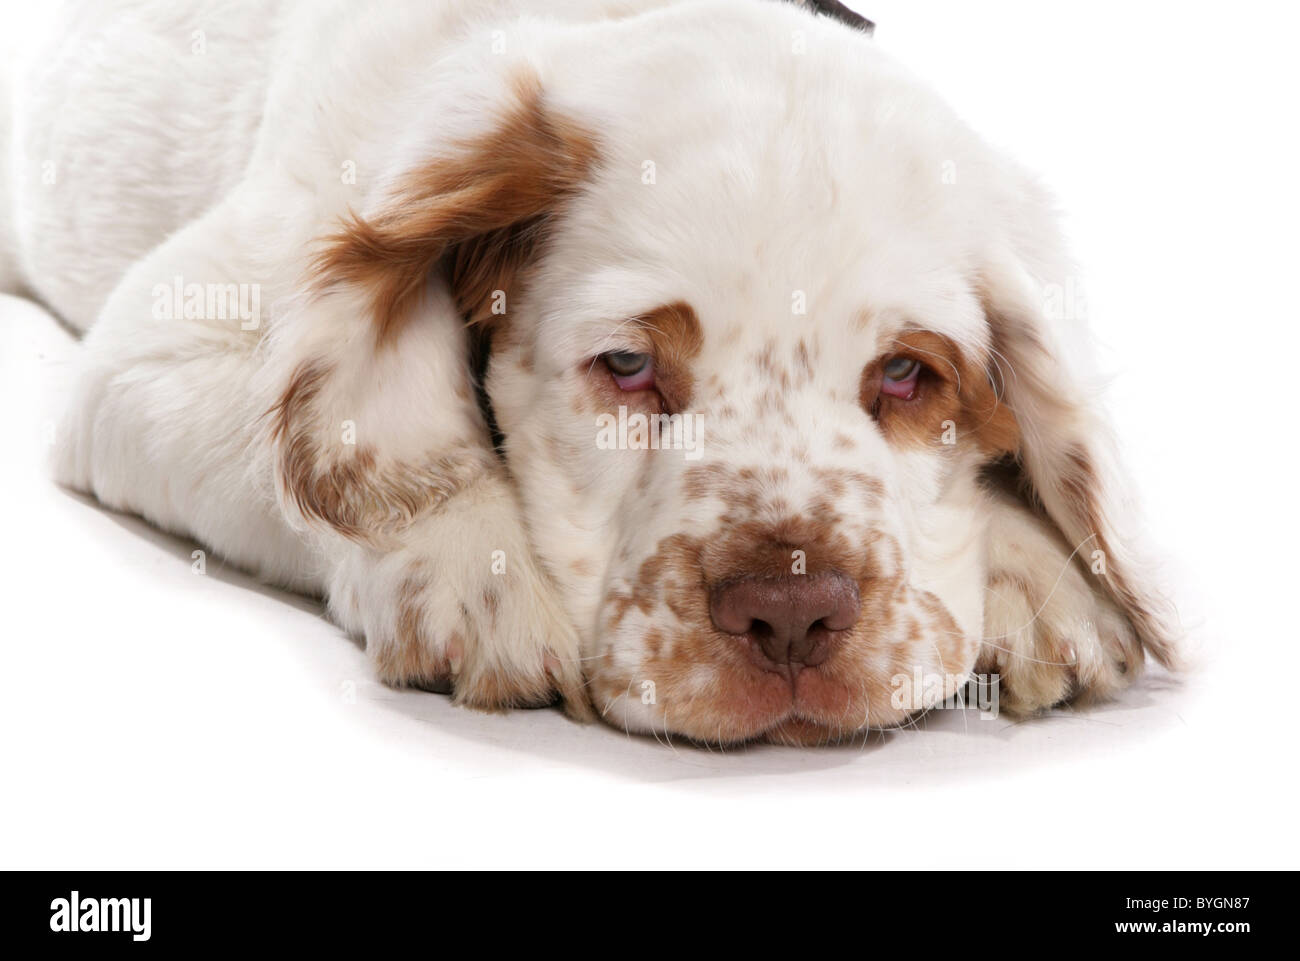 clumber spaniel puppy laying down studio Stock Photo